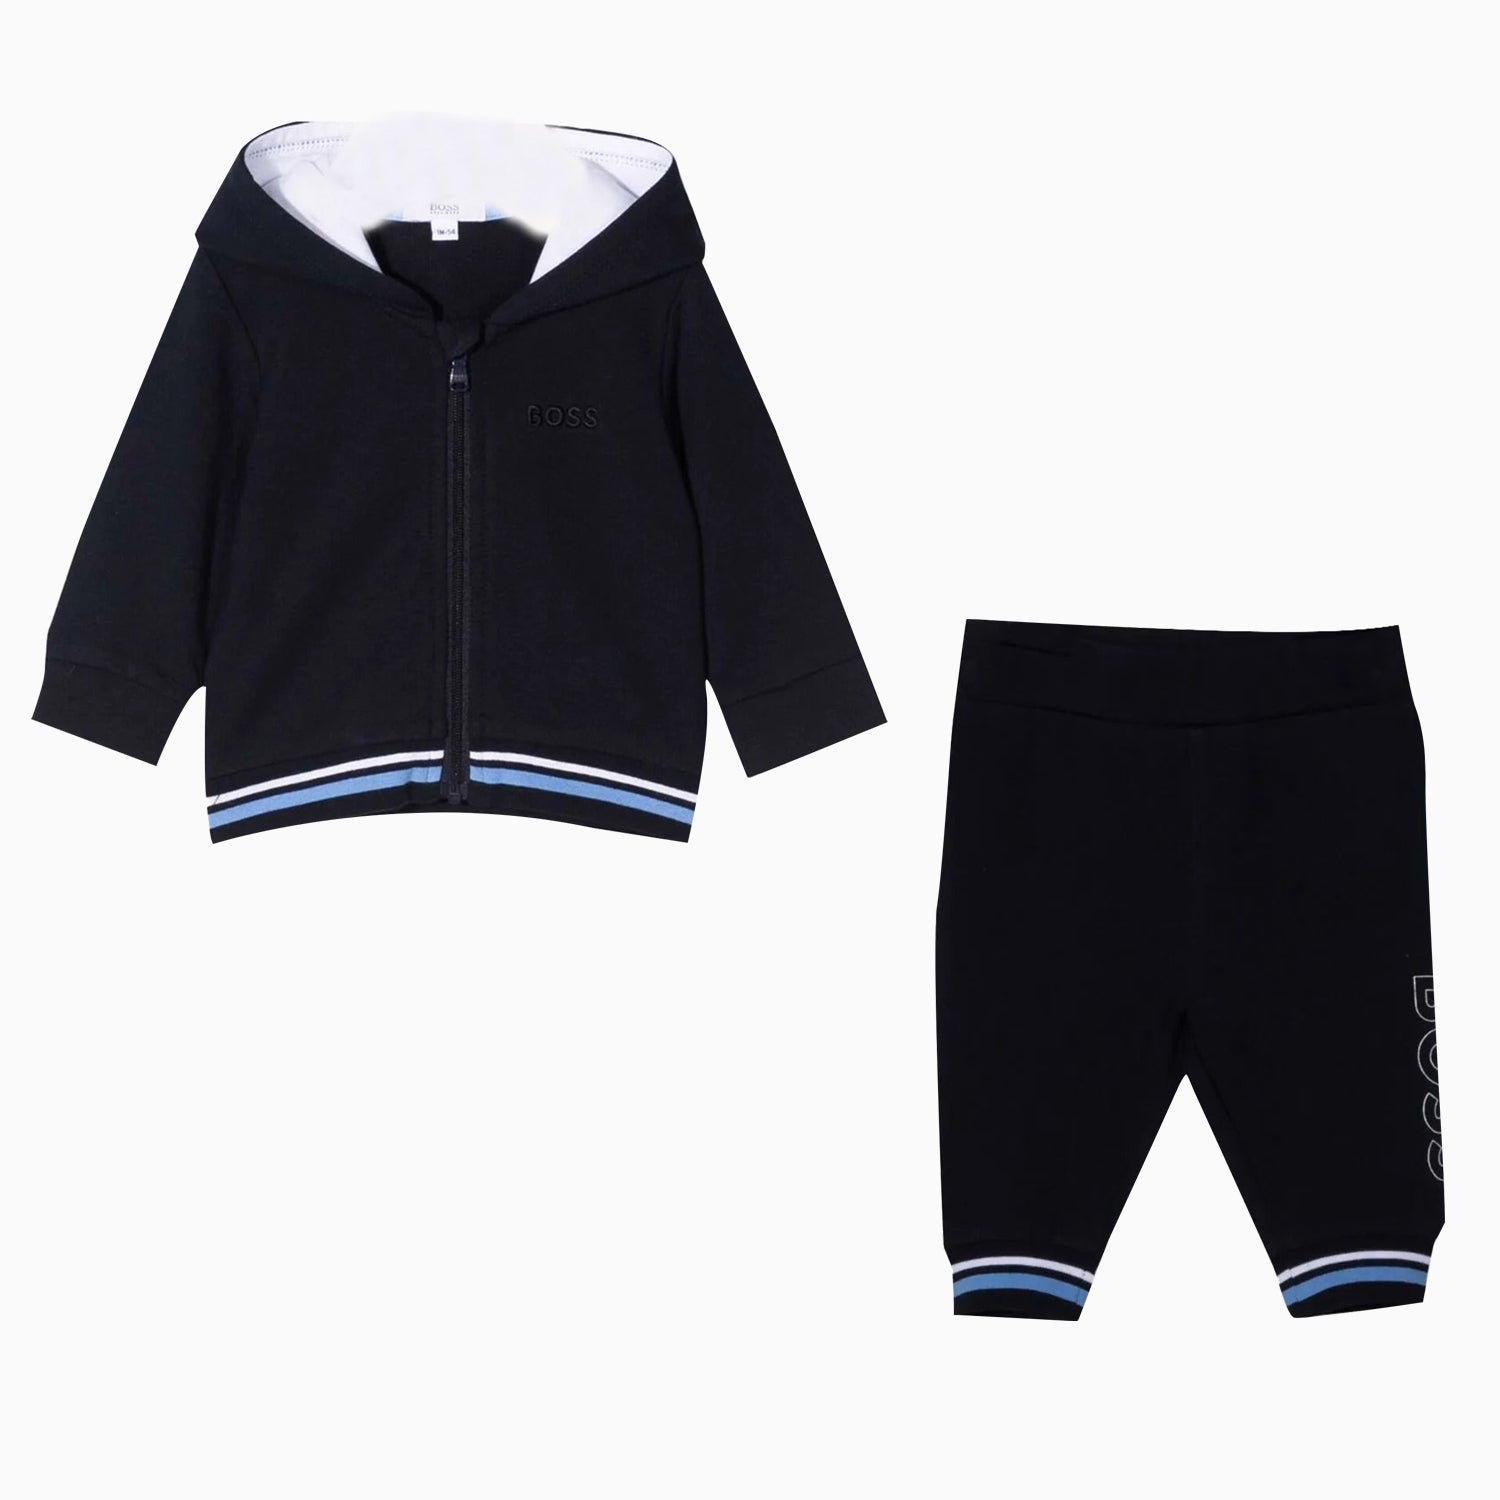 kids-elastane-french-terry-outfit-infants-j95333-849-j94305-849